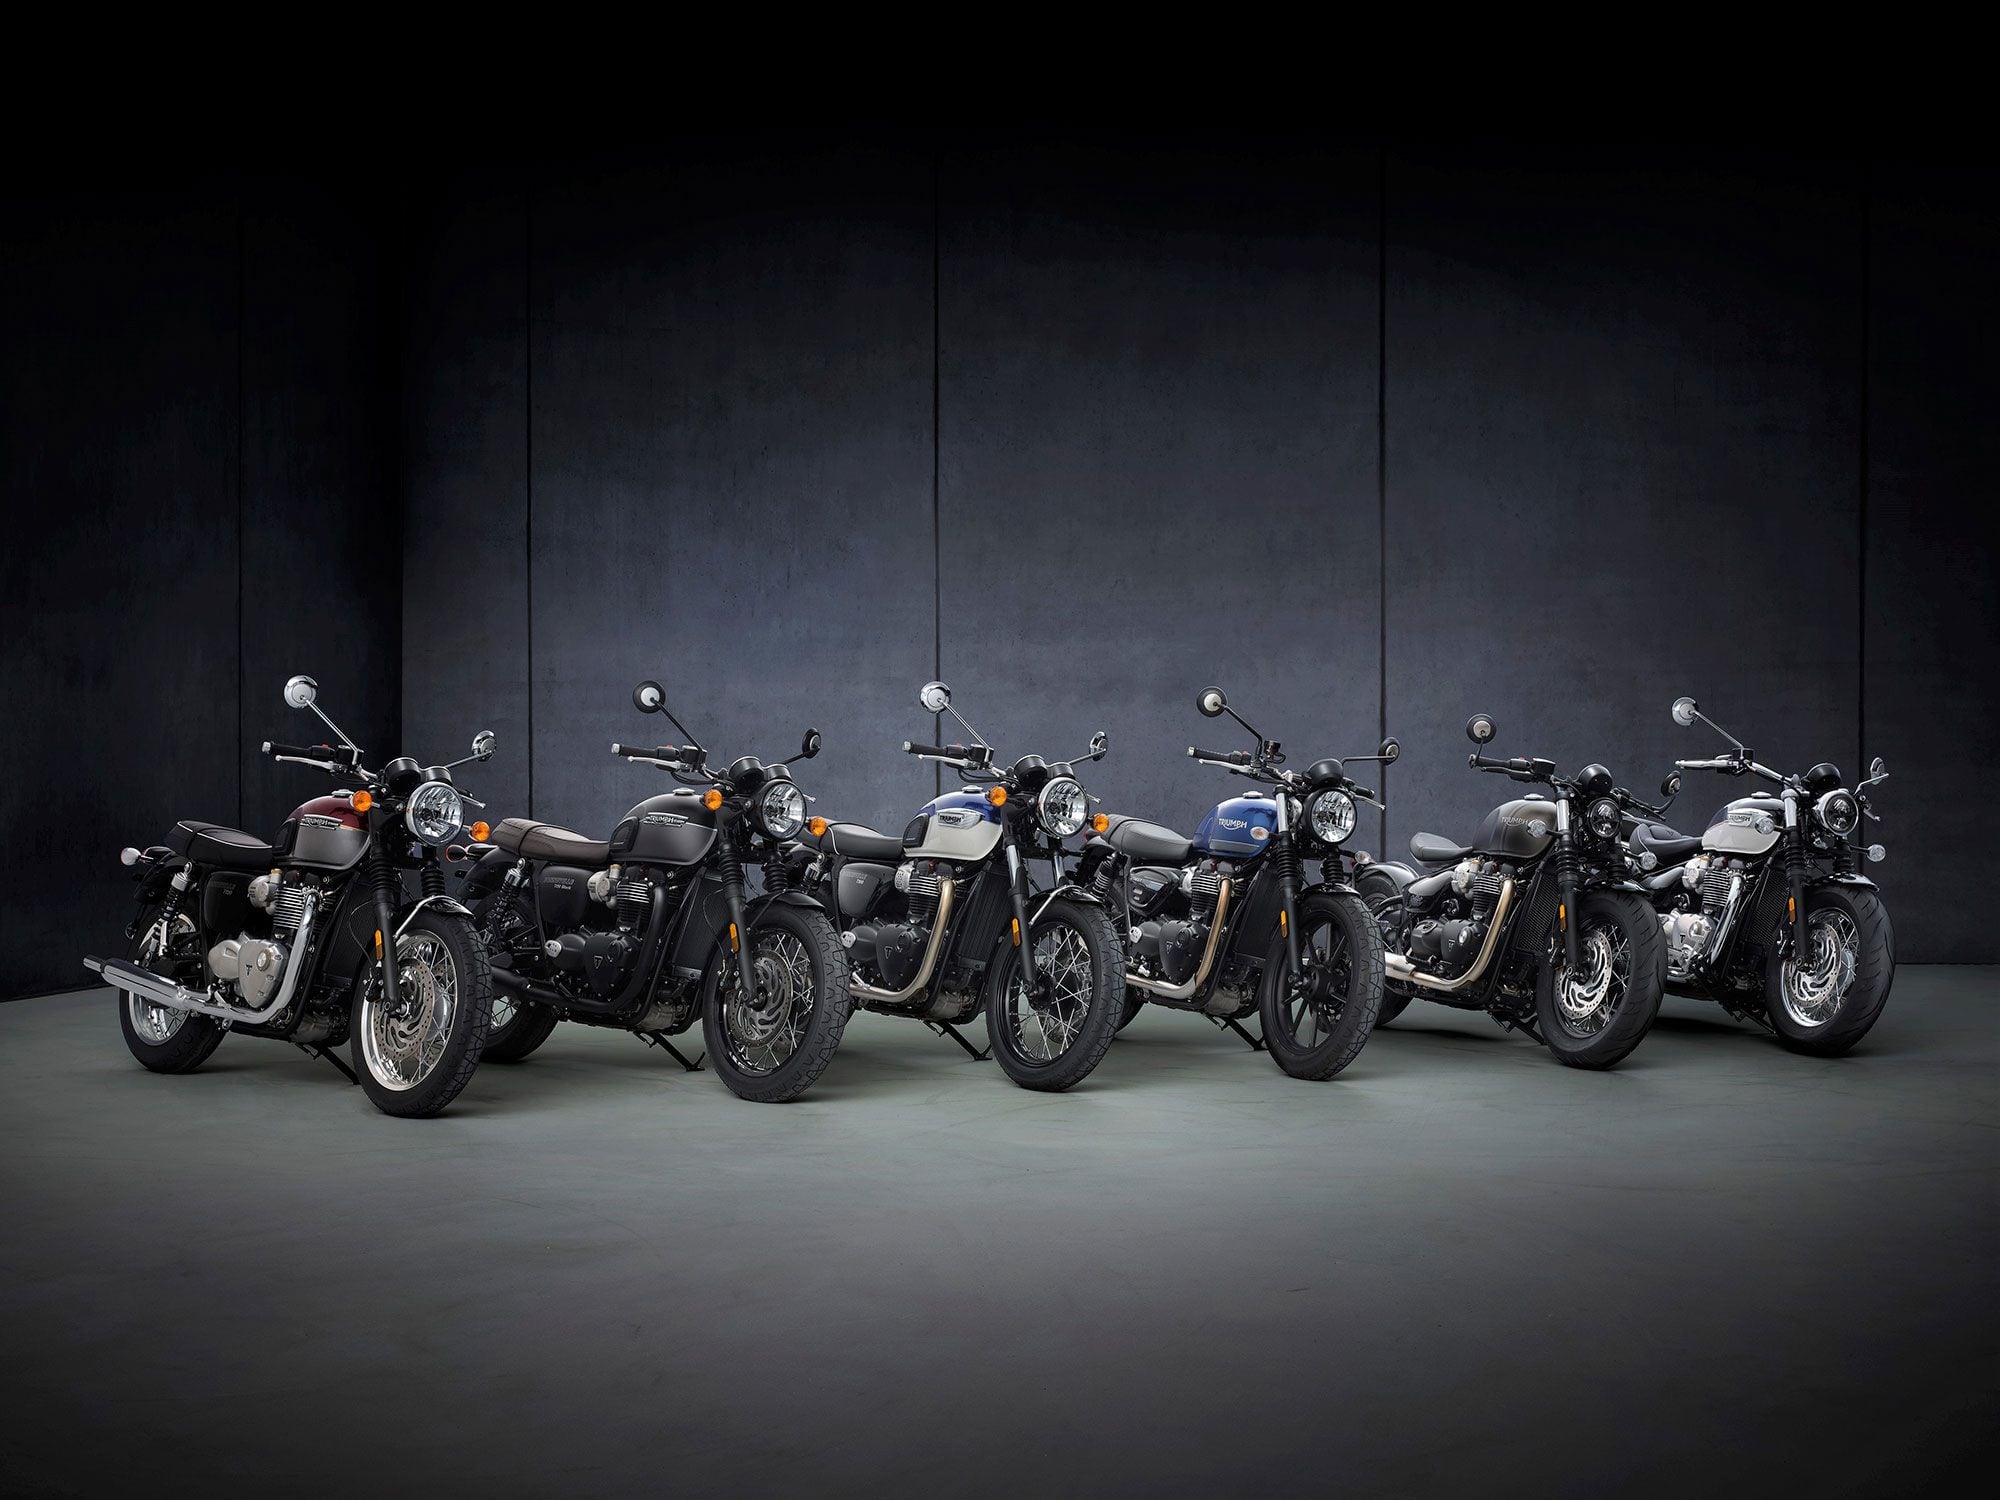 Triumph has upgraded the majority of its Bonneville family. You’re looking at seven models for 2021 so far.